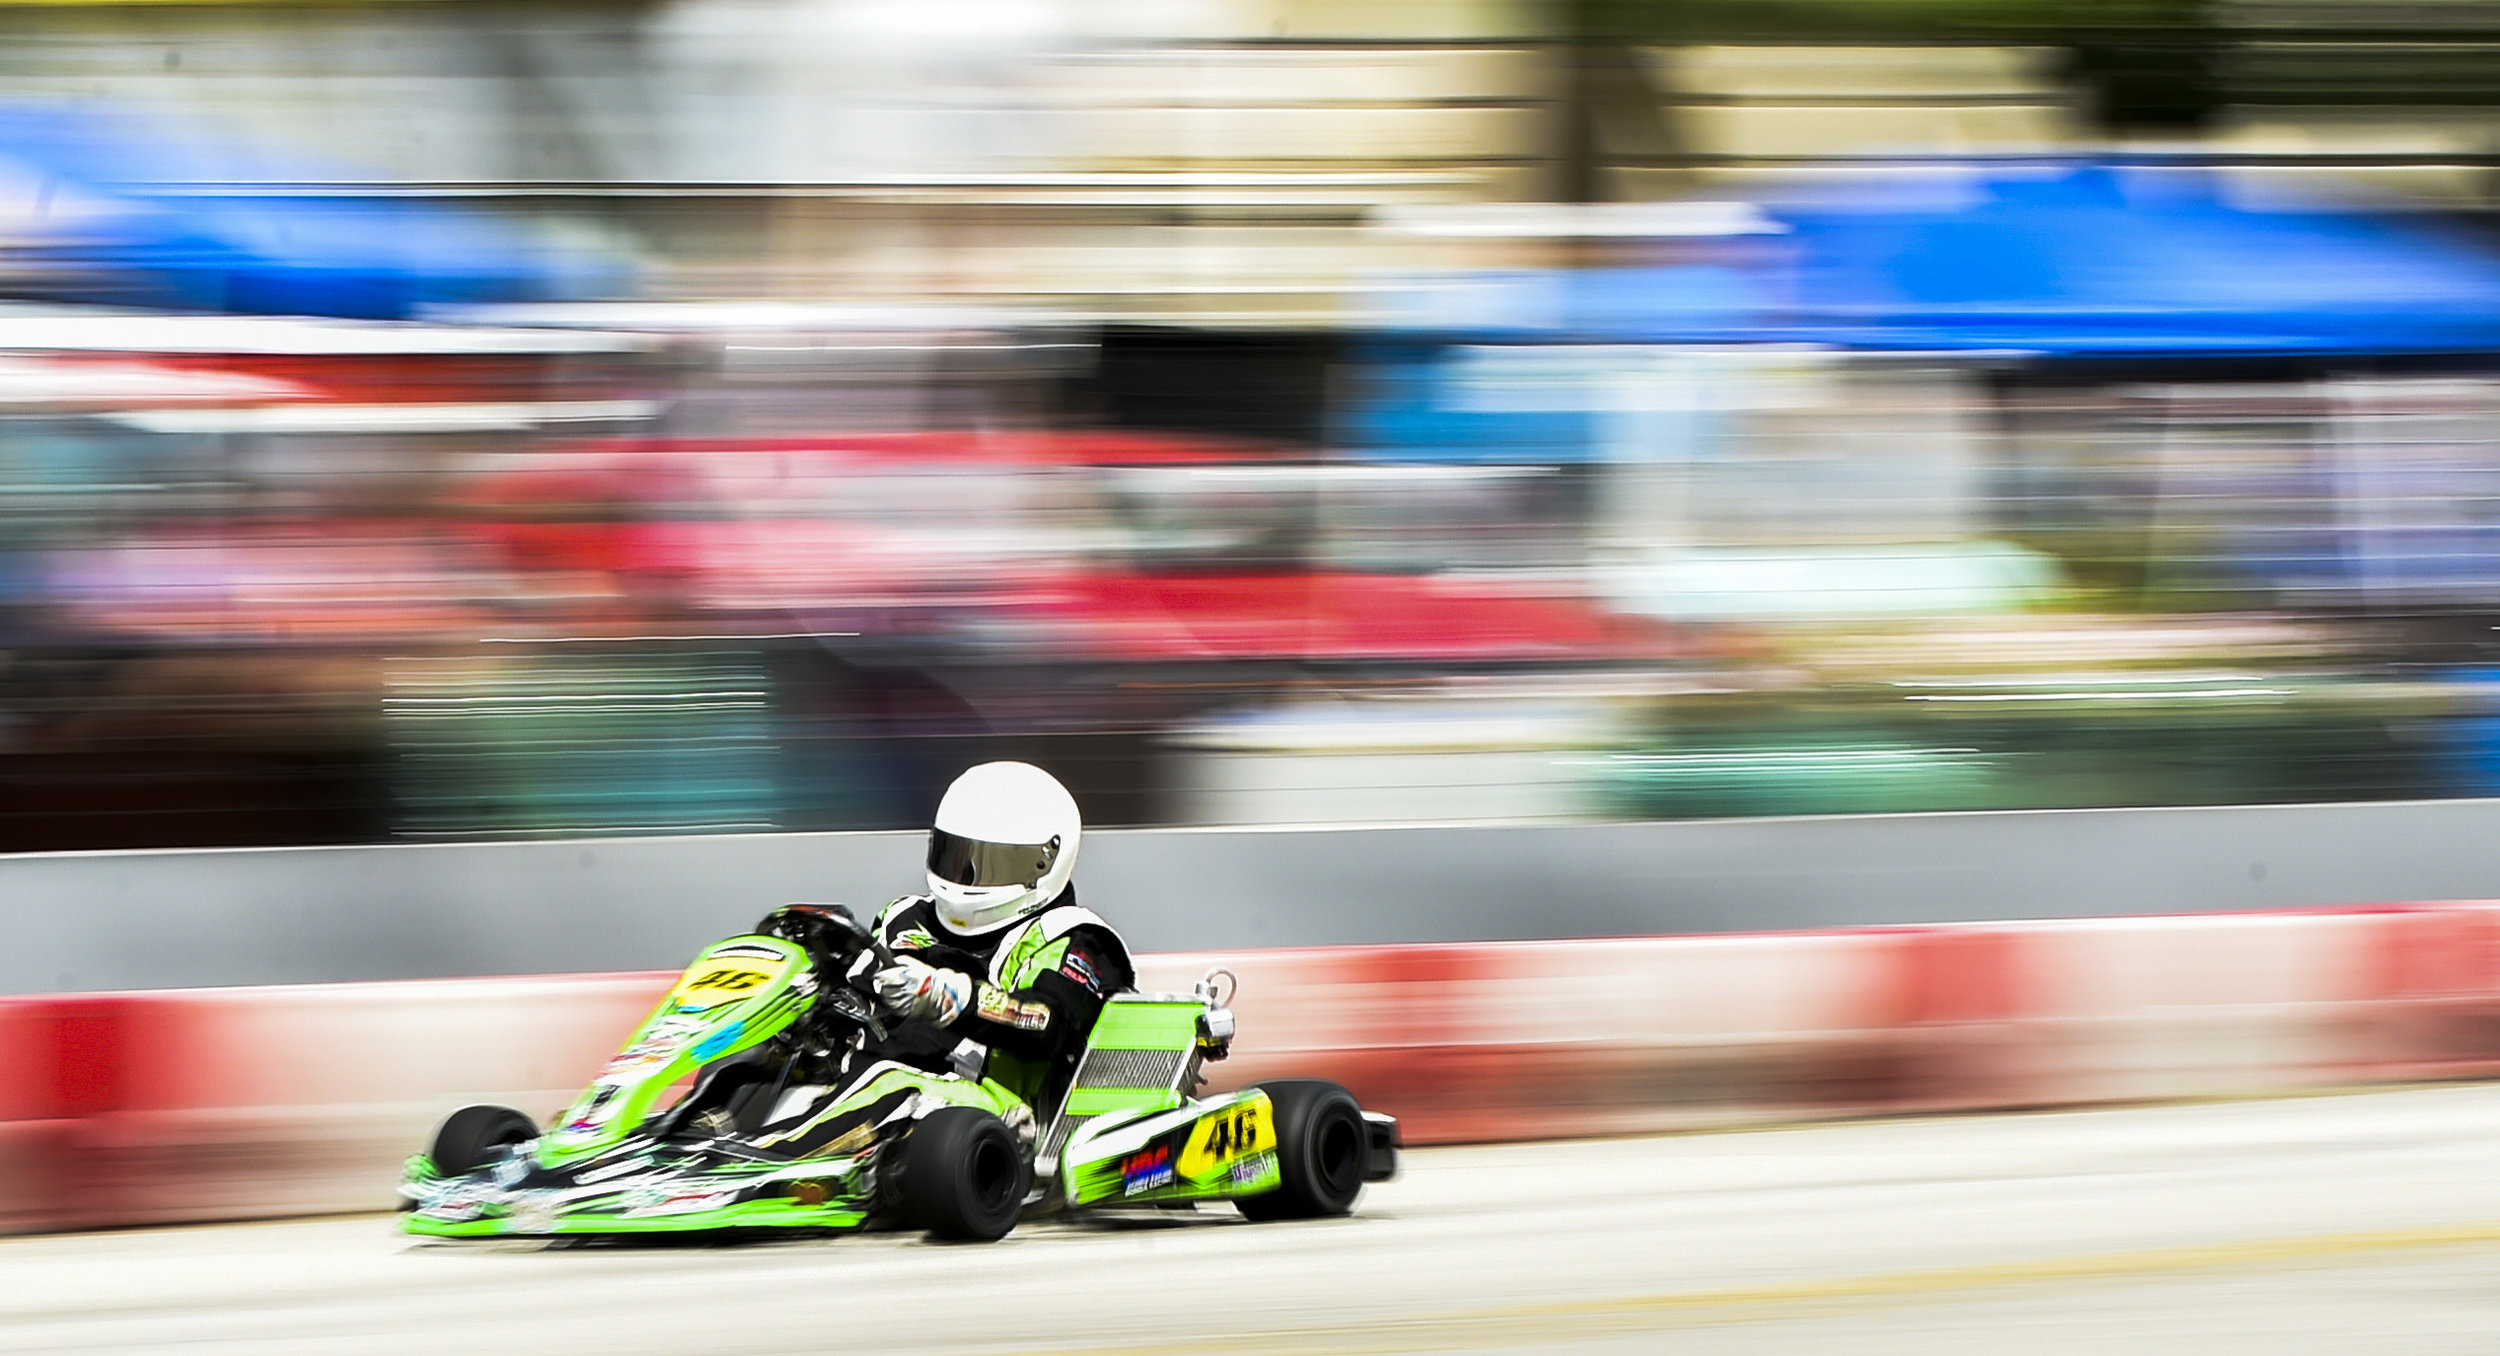 A go-kart racer speeds up a straightaway during the Rock Island Grand Prix Sunday, Sept. 2, 2018, in Rock Island.